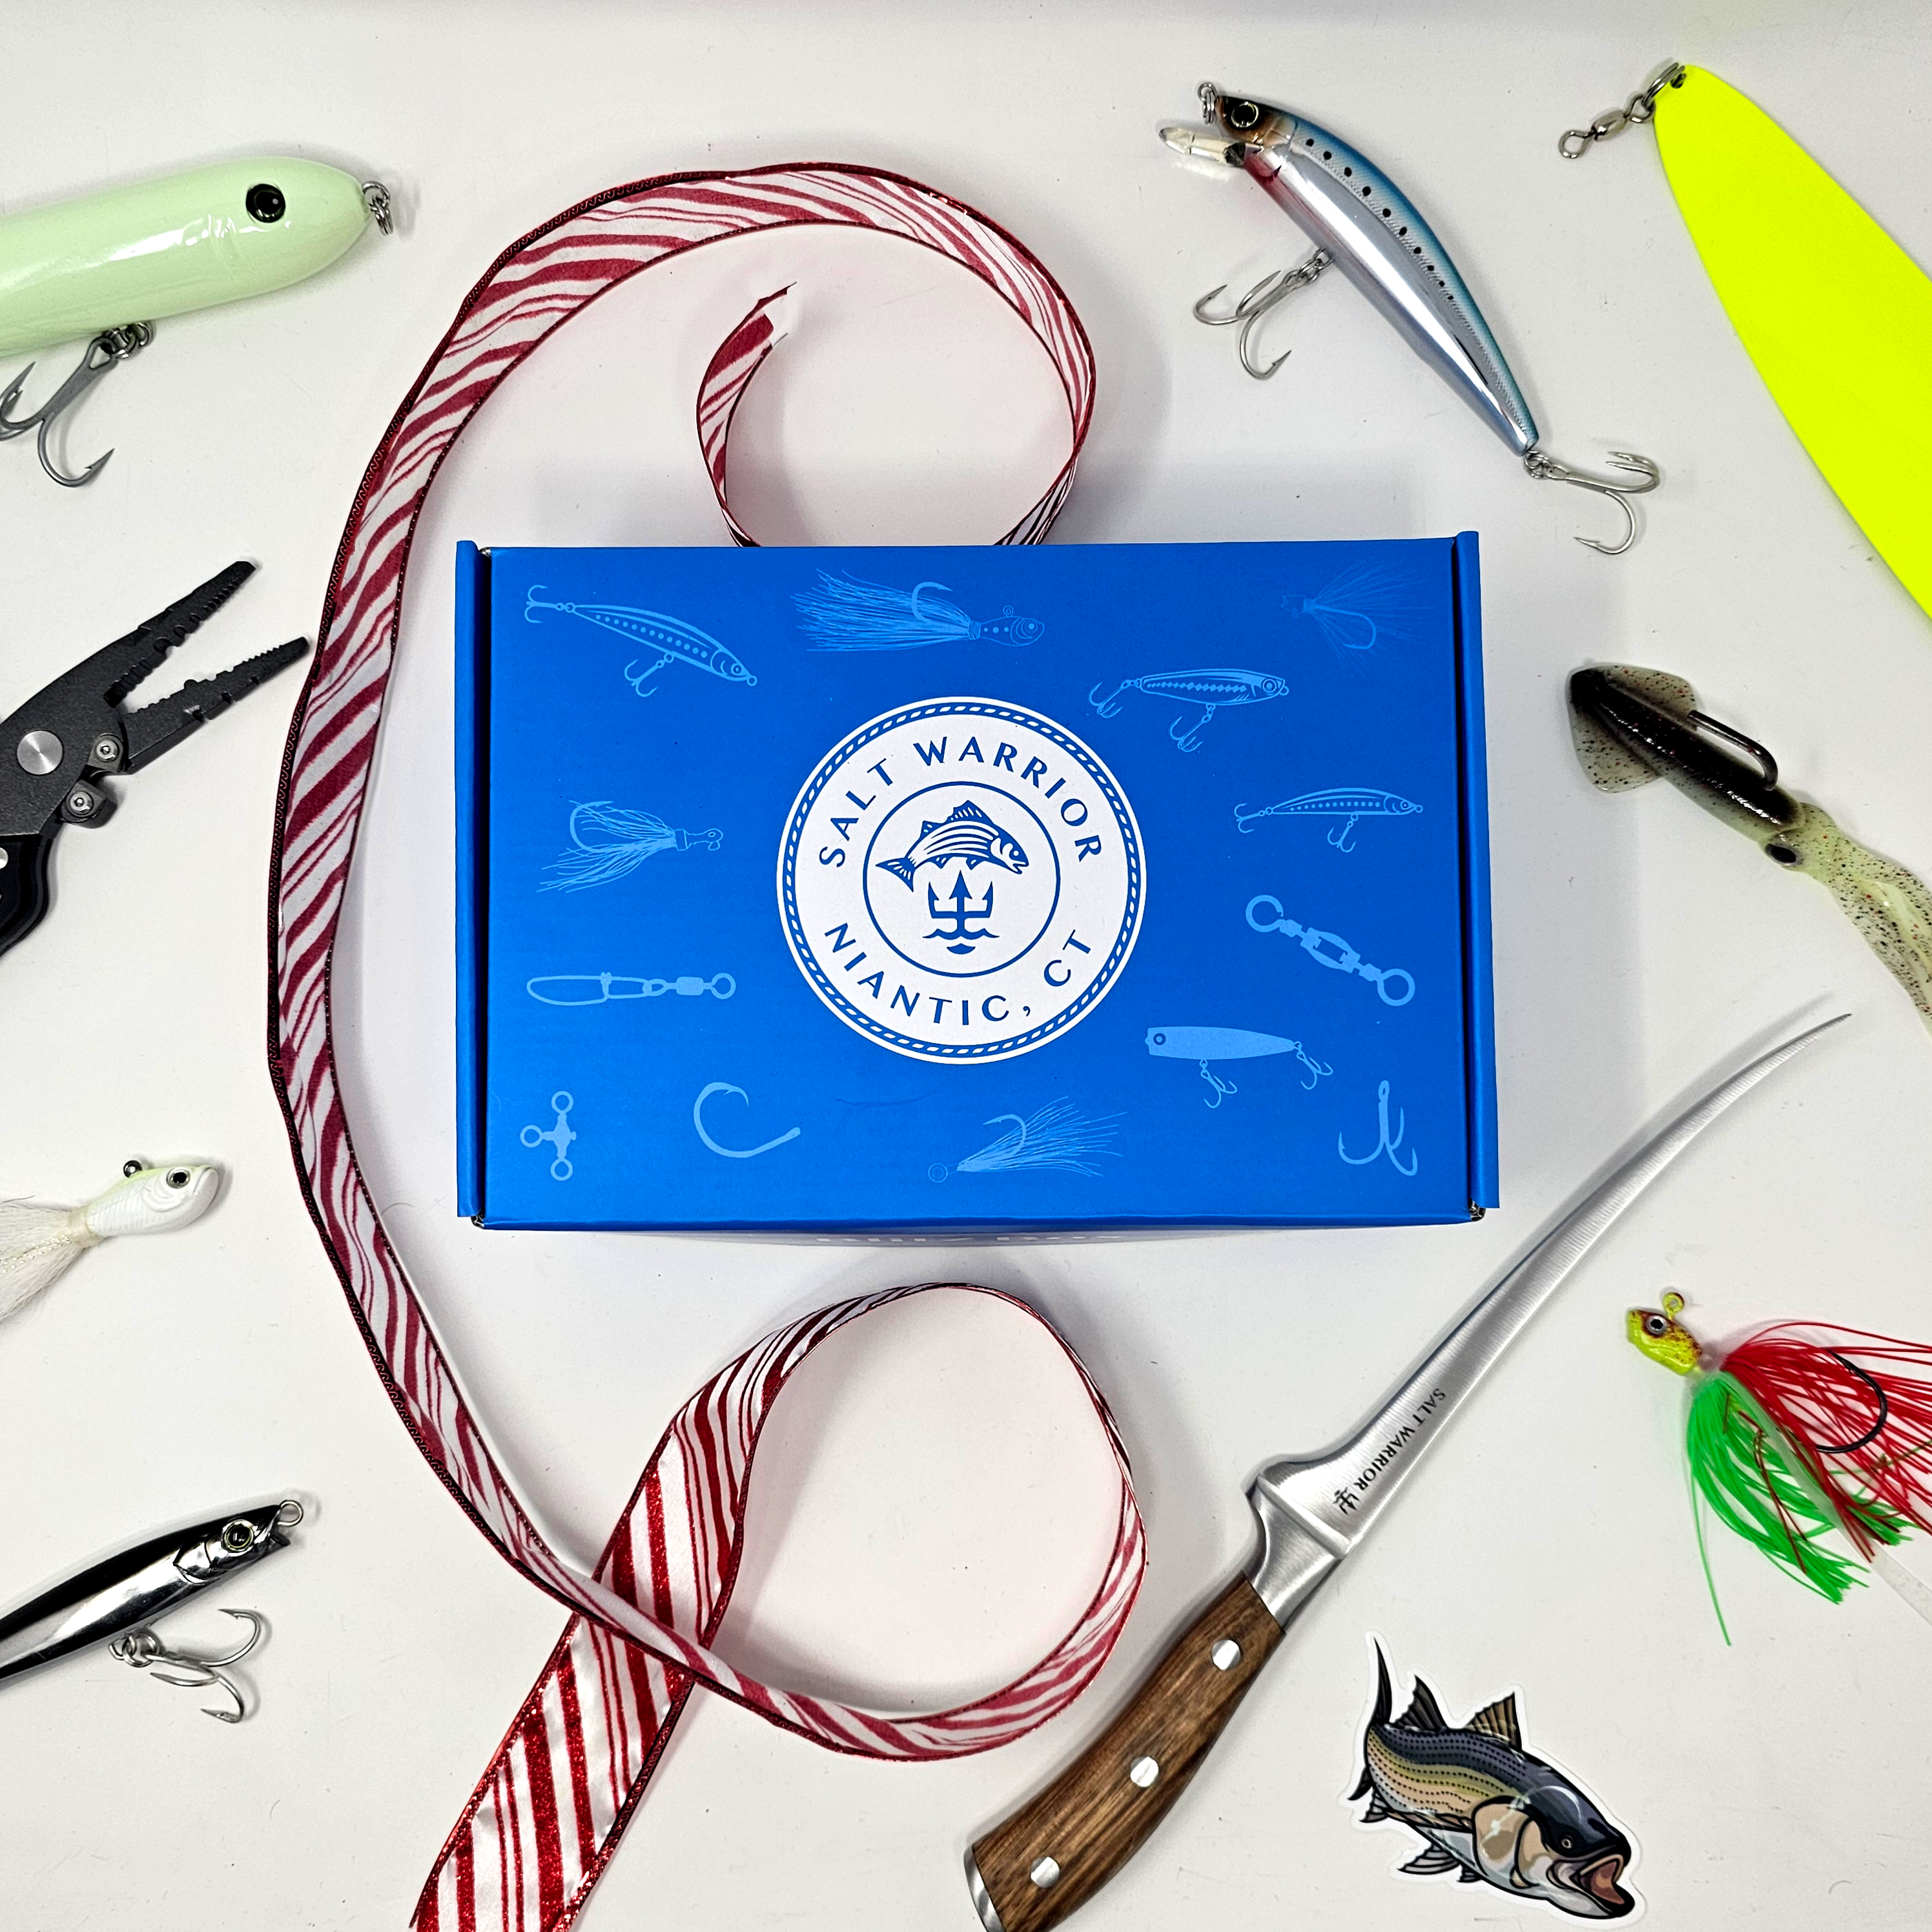 #1 Northeast Saltwater Tackle Gift Box